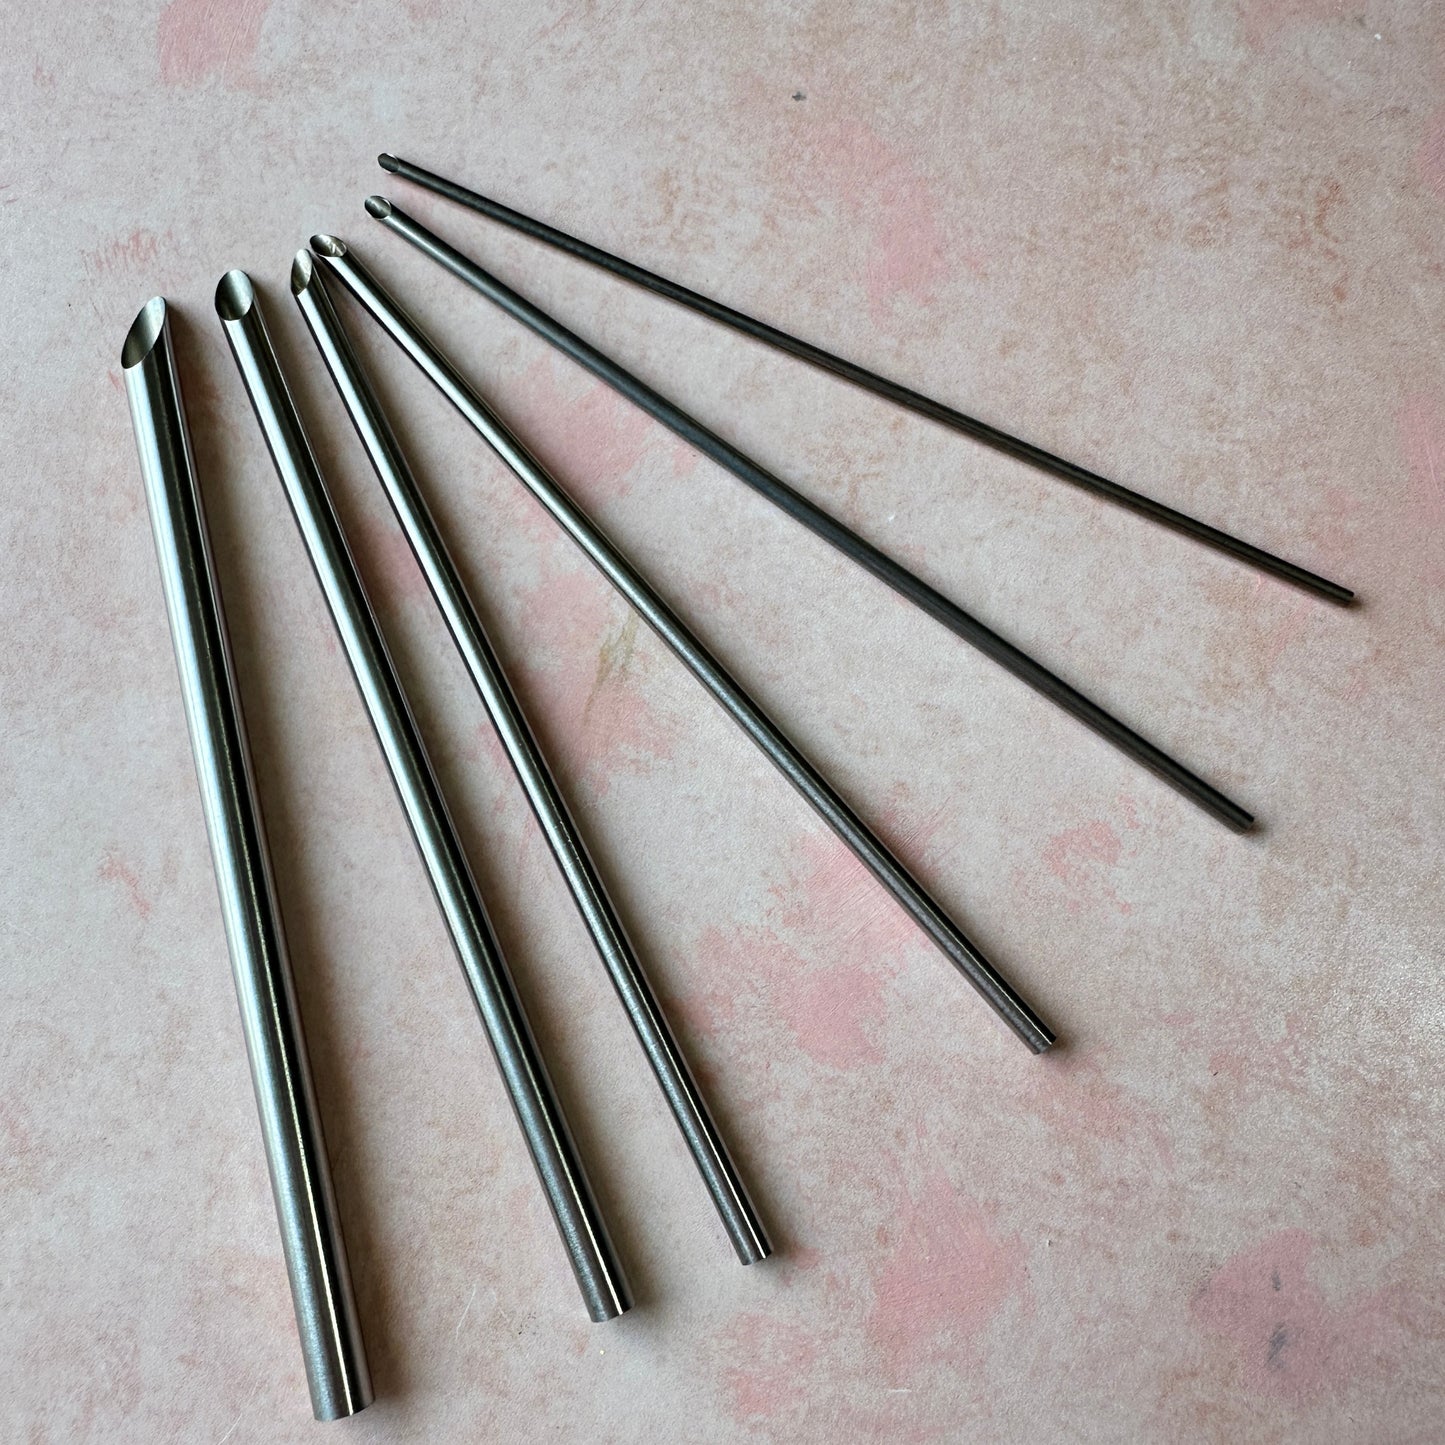 Micro Hole and Scale maker stainless steel metal rod poking tools for clay